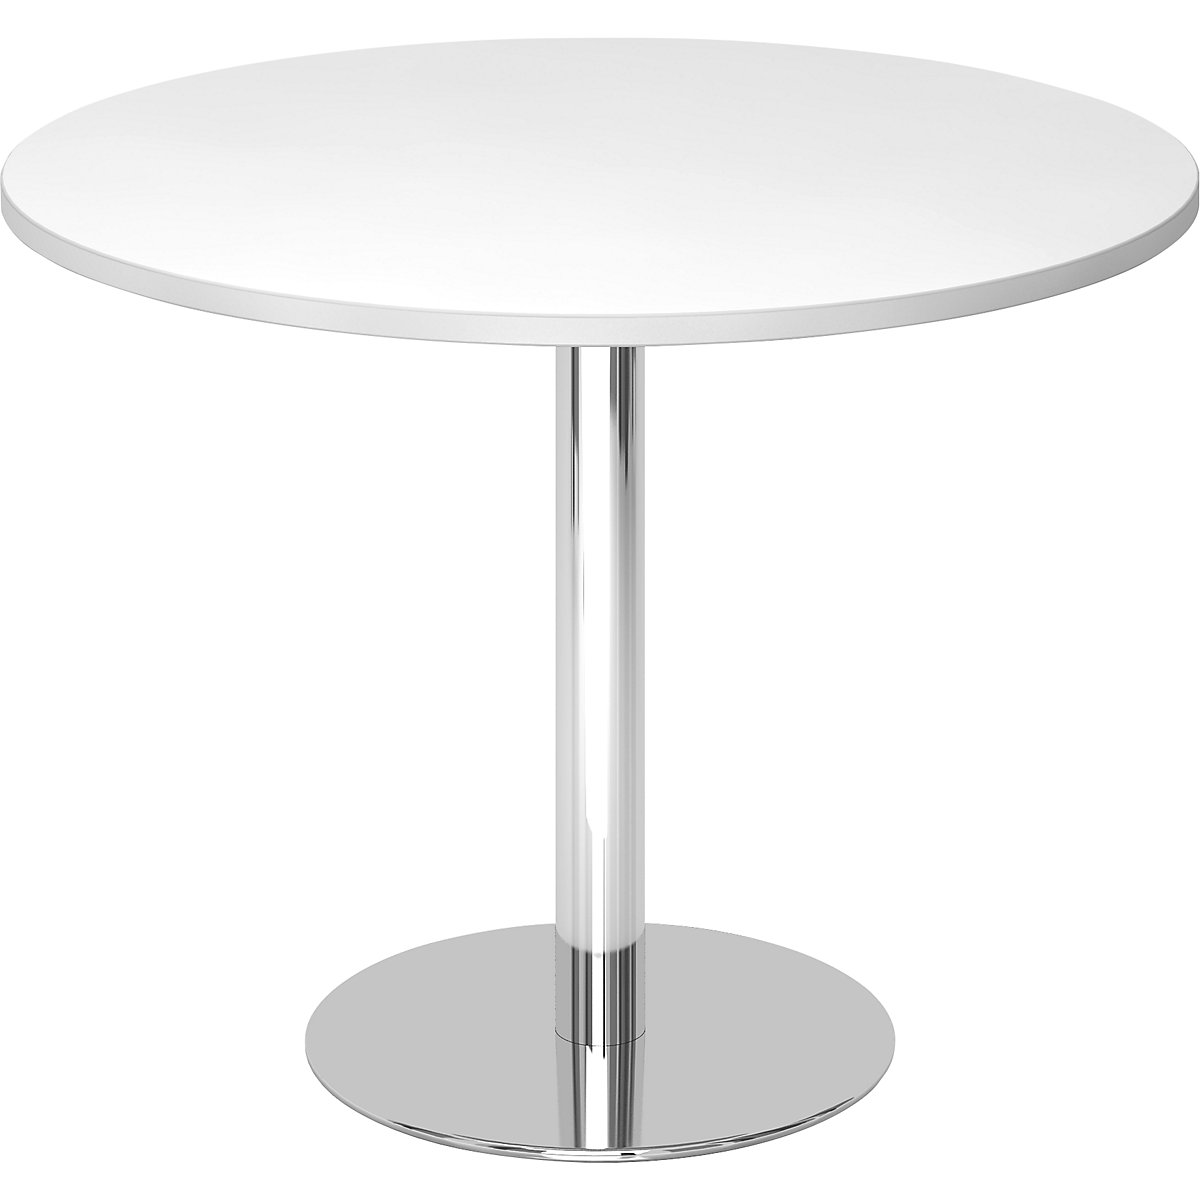 Conference table, Ø 1000 mm, 755 mm high, chrome plated frame, tabletop in white-4